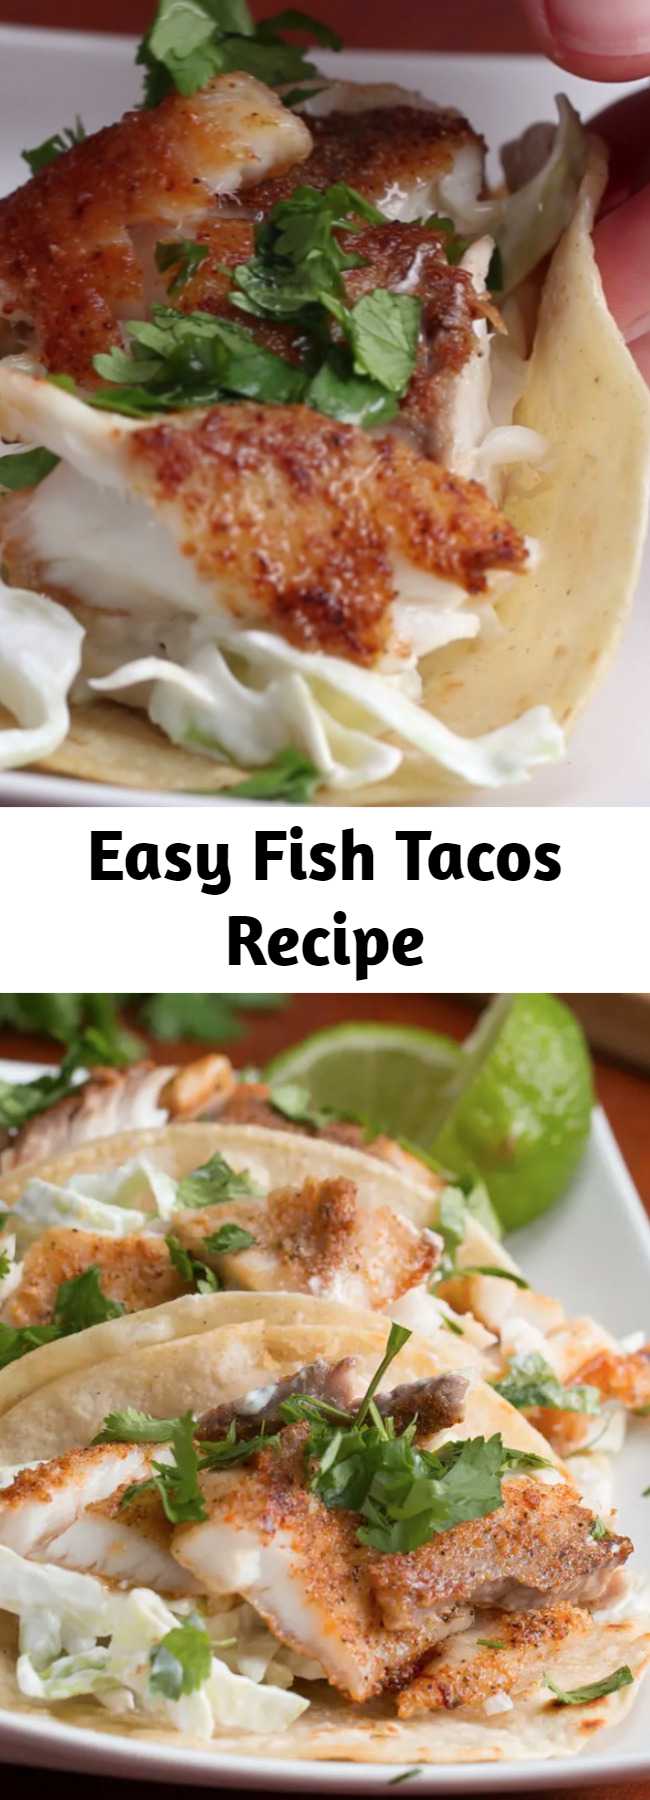 Easy Fish Tacos Recipe - Fish tacos are the best tacos.